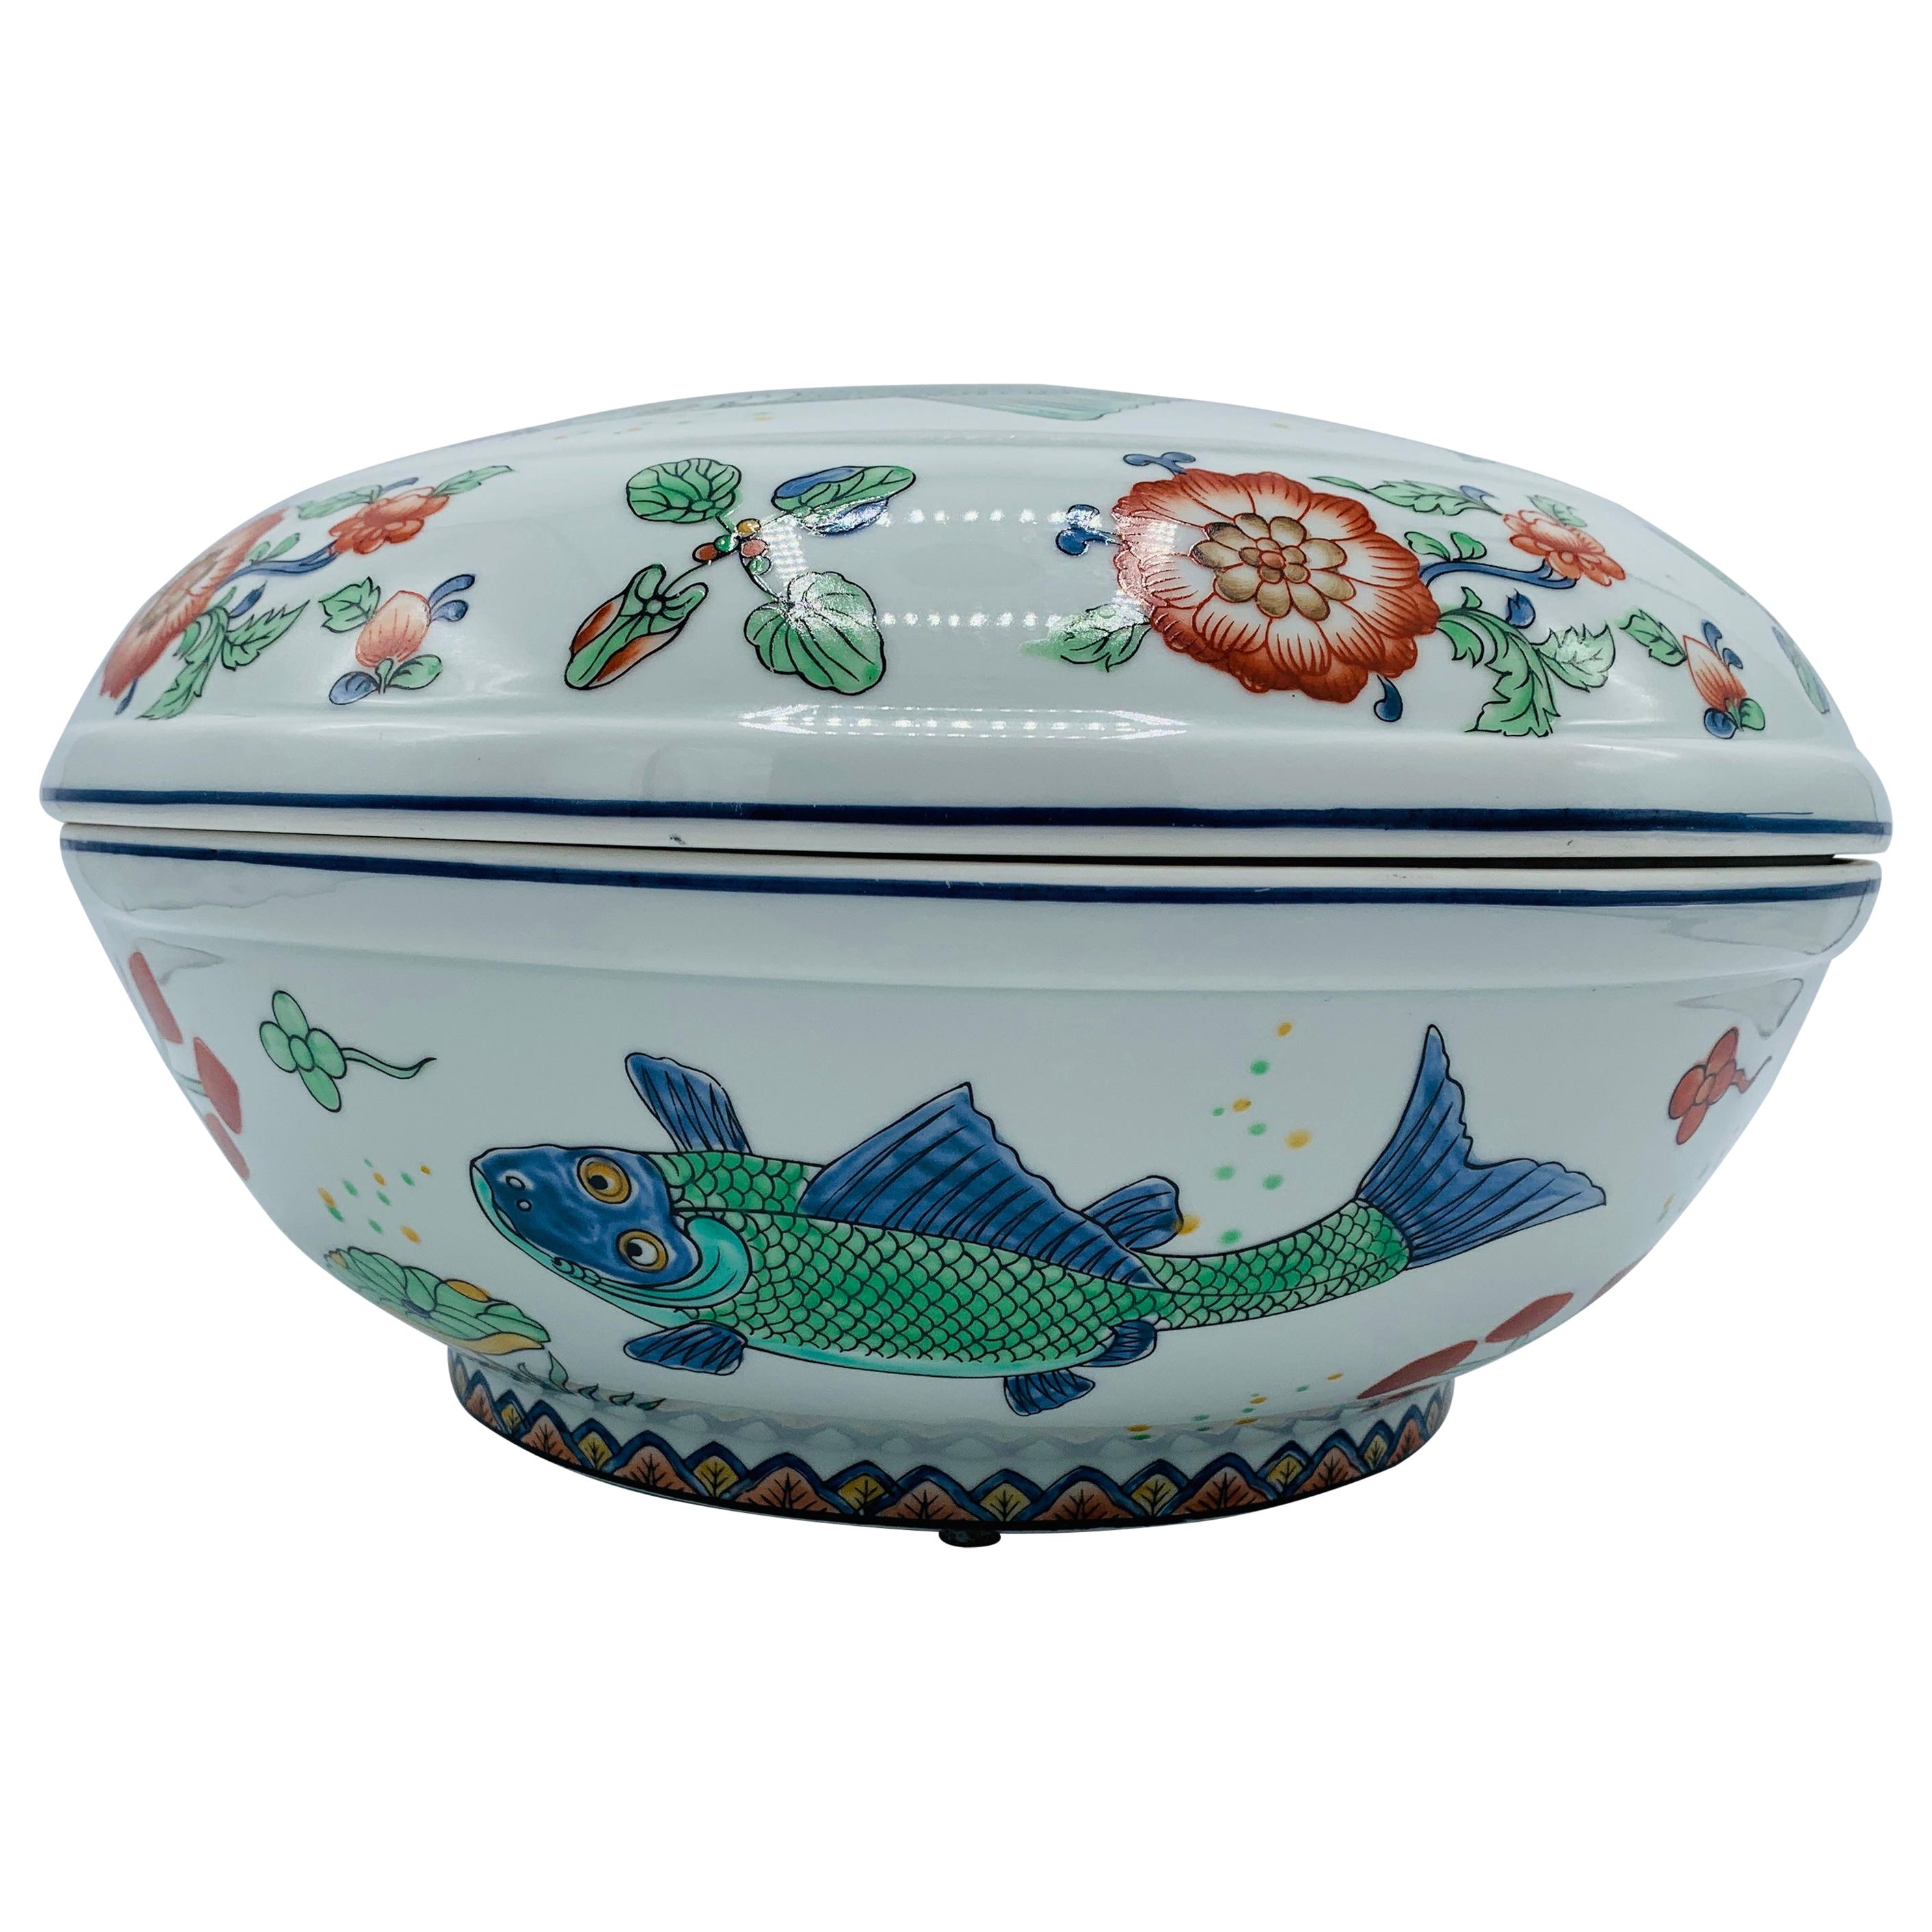 1960s Porcelain Lidded Bowl with Chinoiserie Fish Motif For Sale